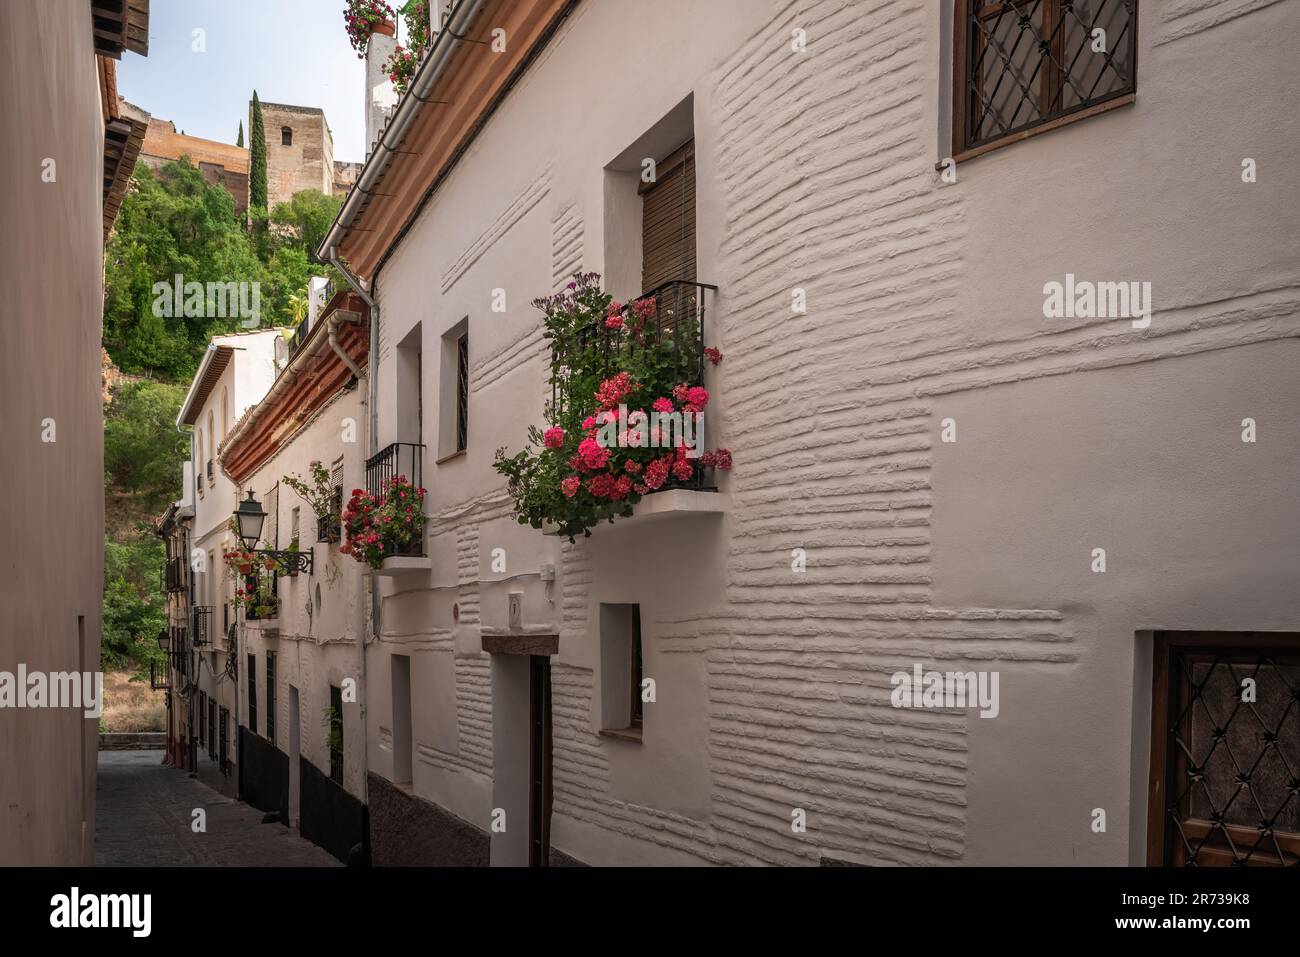 Street of traditional Albaicin district with Alhambra Towers on background - Granada, Andalusia, Spain Stock Photo